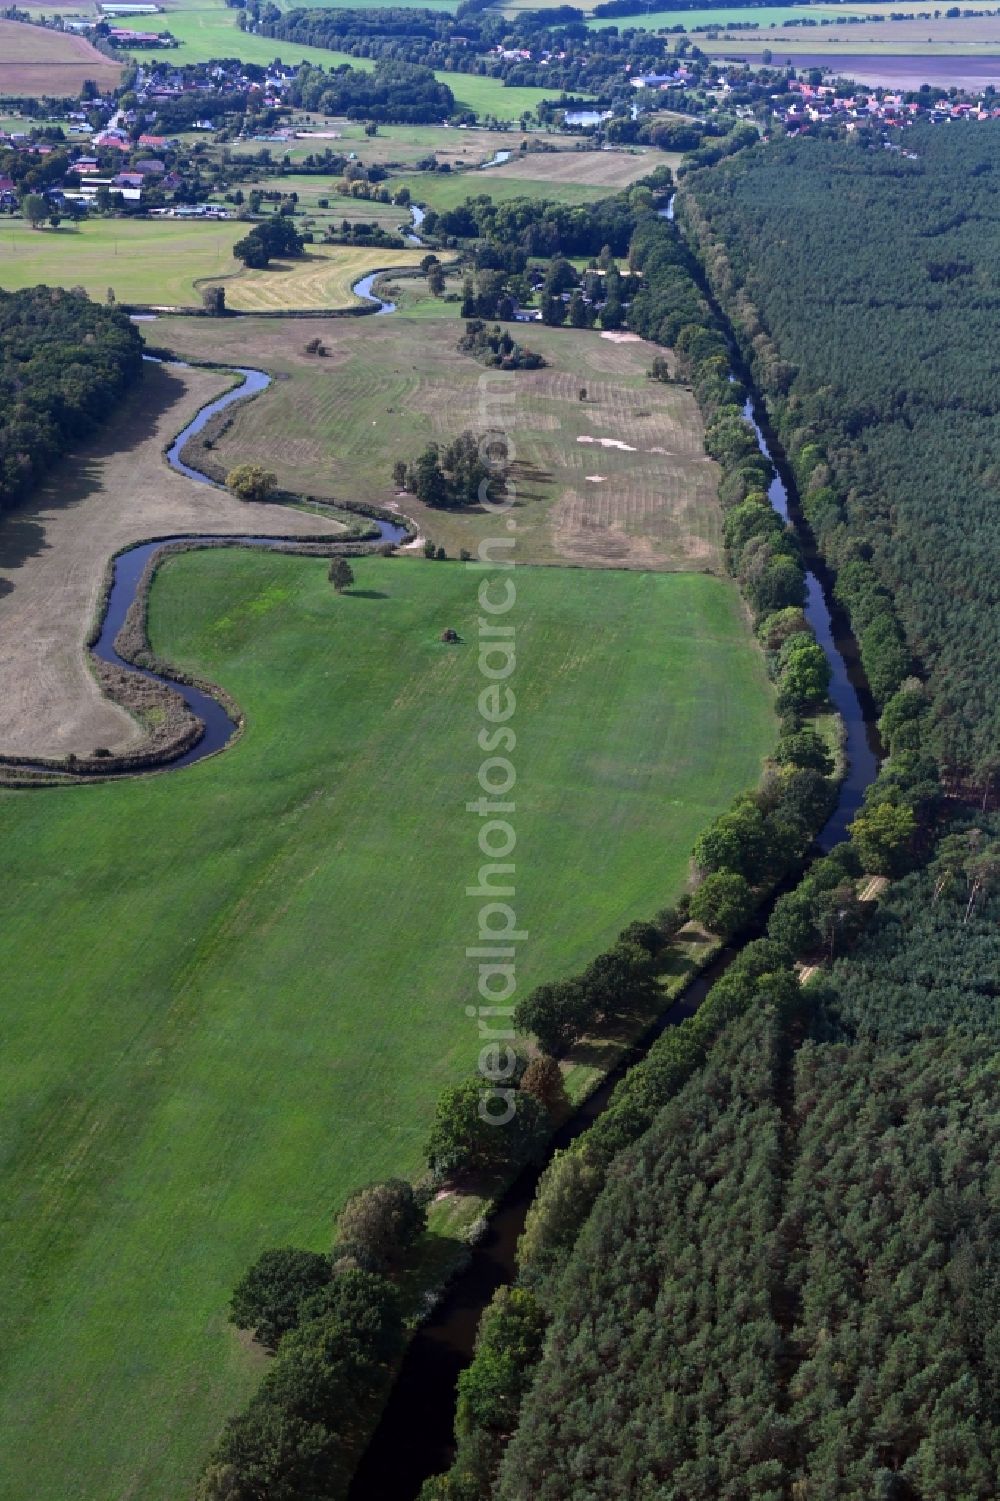 Garwitz from above - Riparian zones on the course of the river of Elde in Garwitz in the state Mecklenburg - Western Pomerania, Germany